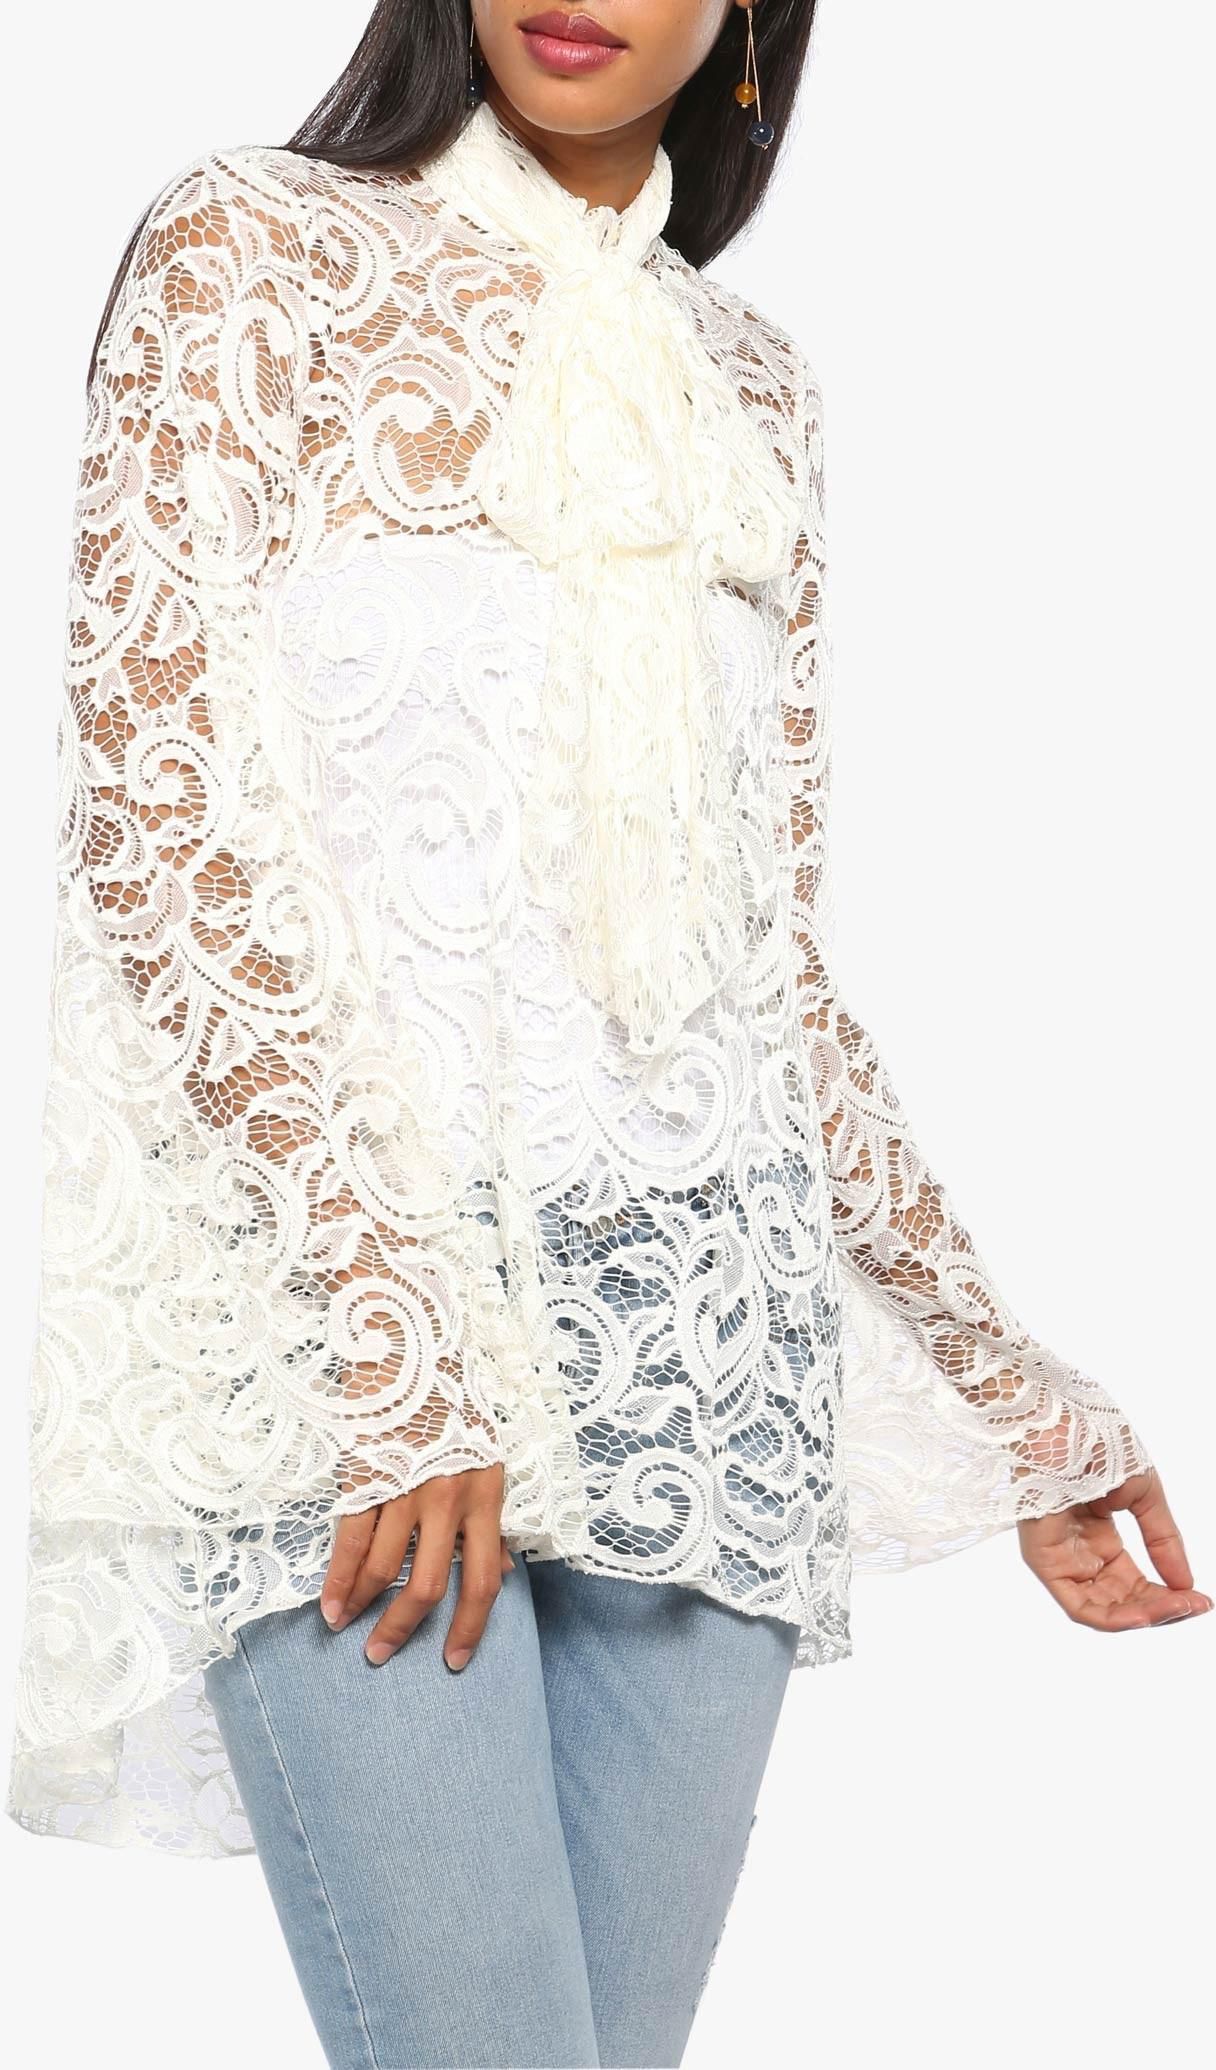 Cream Sheer Lace Blouse